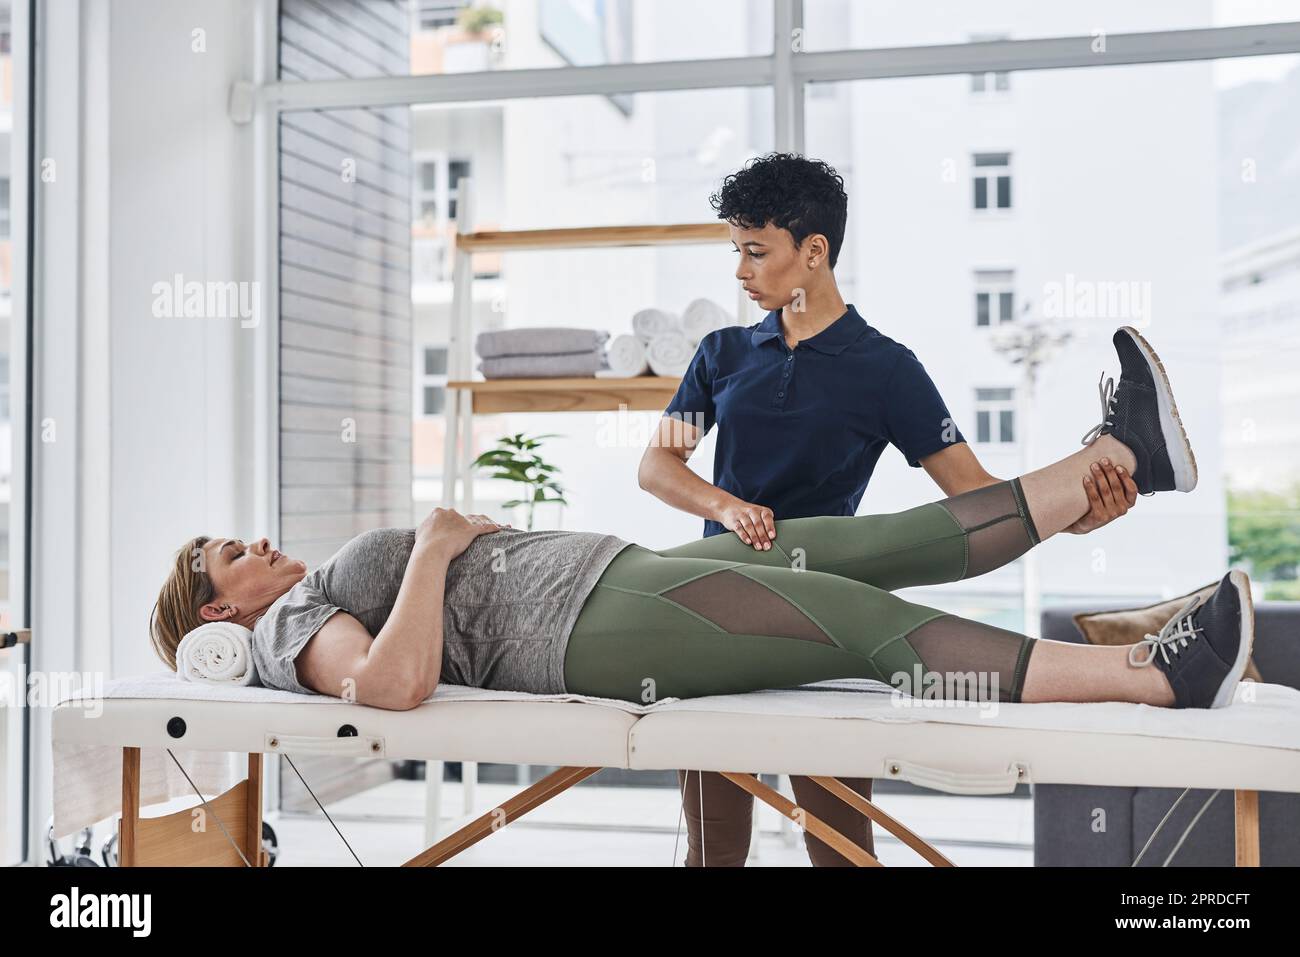 Getting back to full fitness one stretch at a time. a young physiotherapist doing leg exercises with her patient inside her office at a clinic. Stock Photo